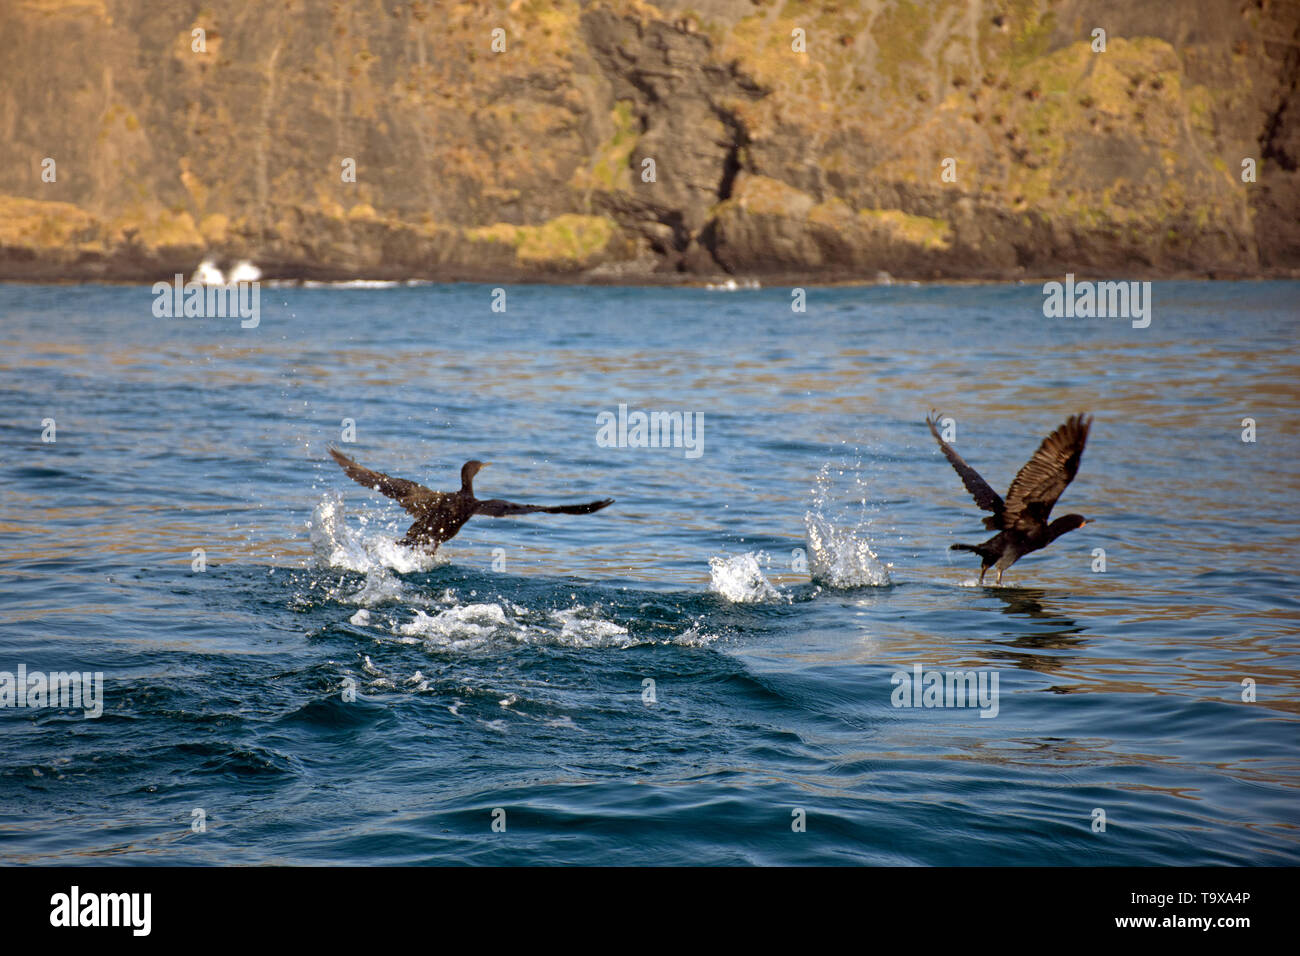 Cape cormorants, Phalacrocorax capensis, flying close to the coast in Coffee Bay, Eastern Cape Wild Coast, South Africa Stock Photo